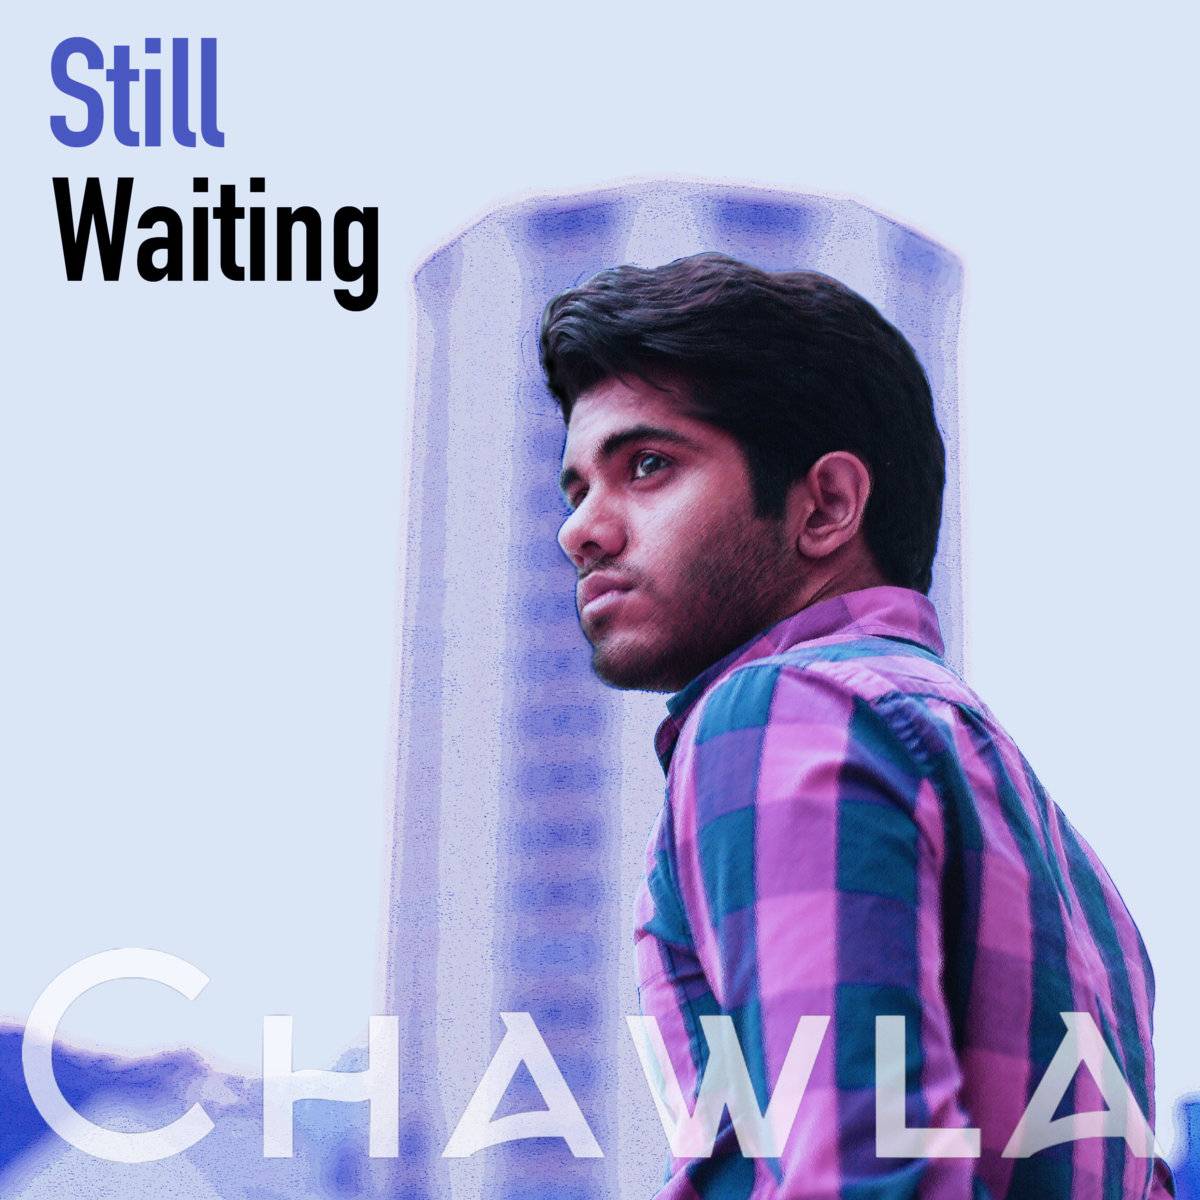 Chawla releases his debut EP Still Waiting